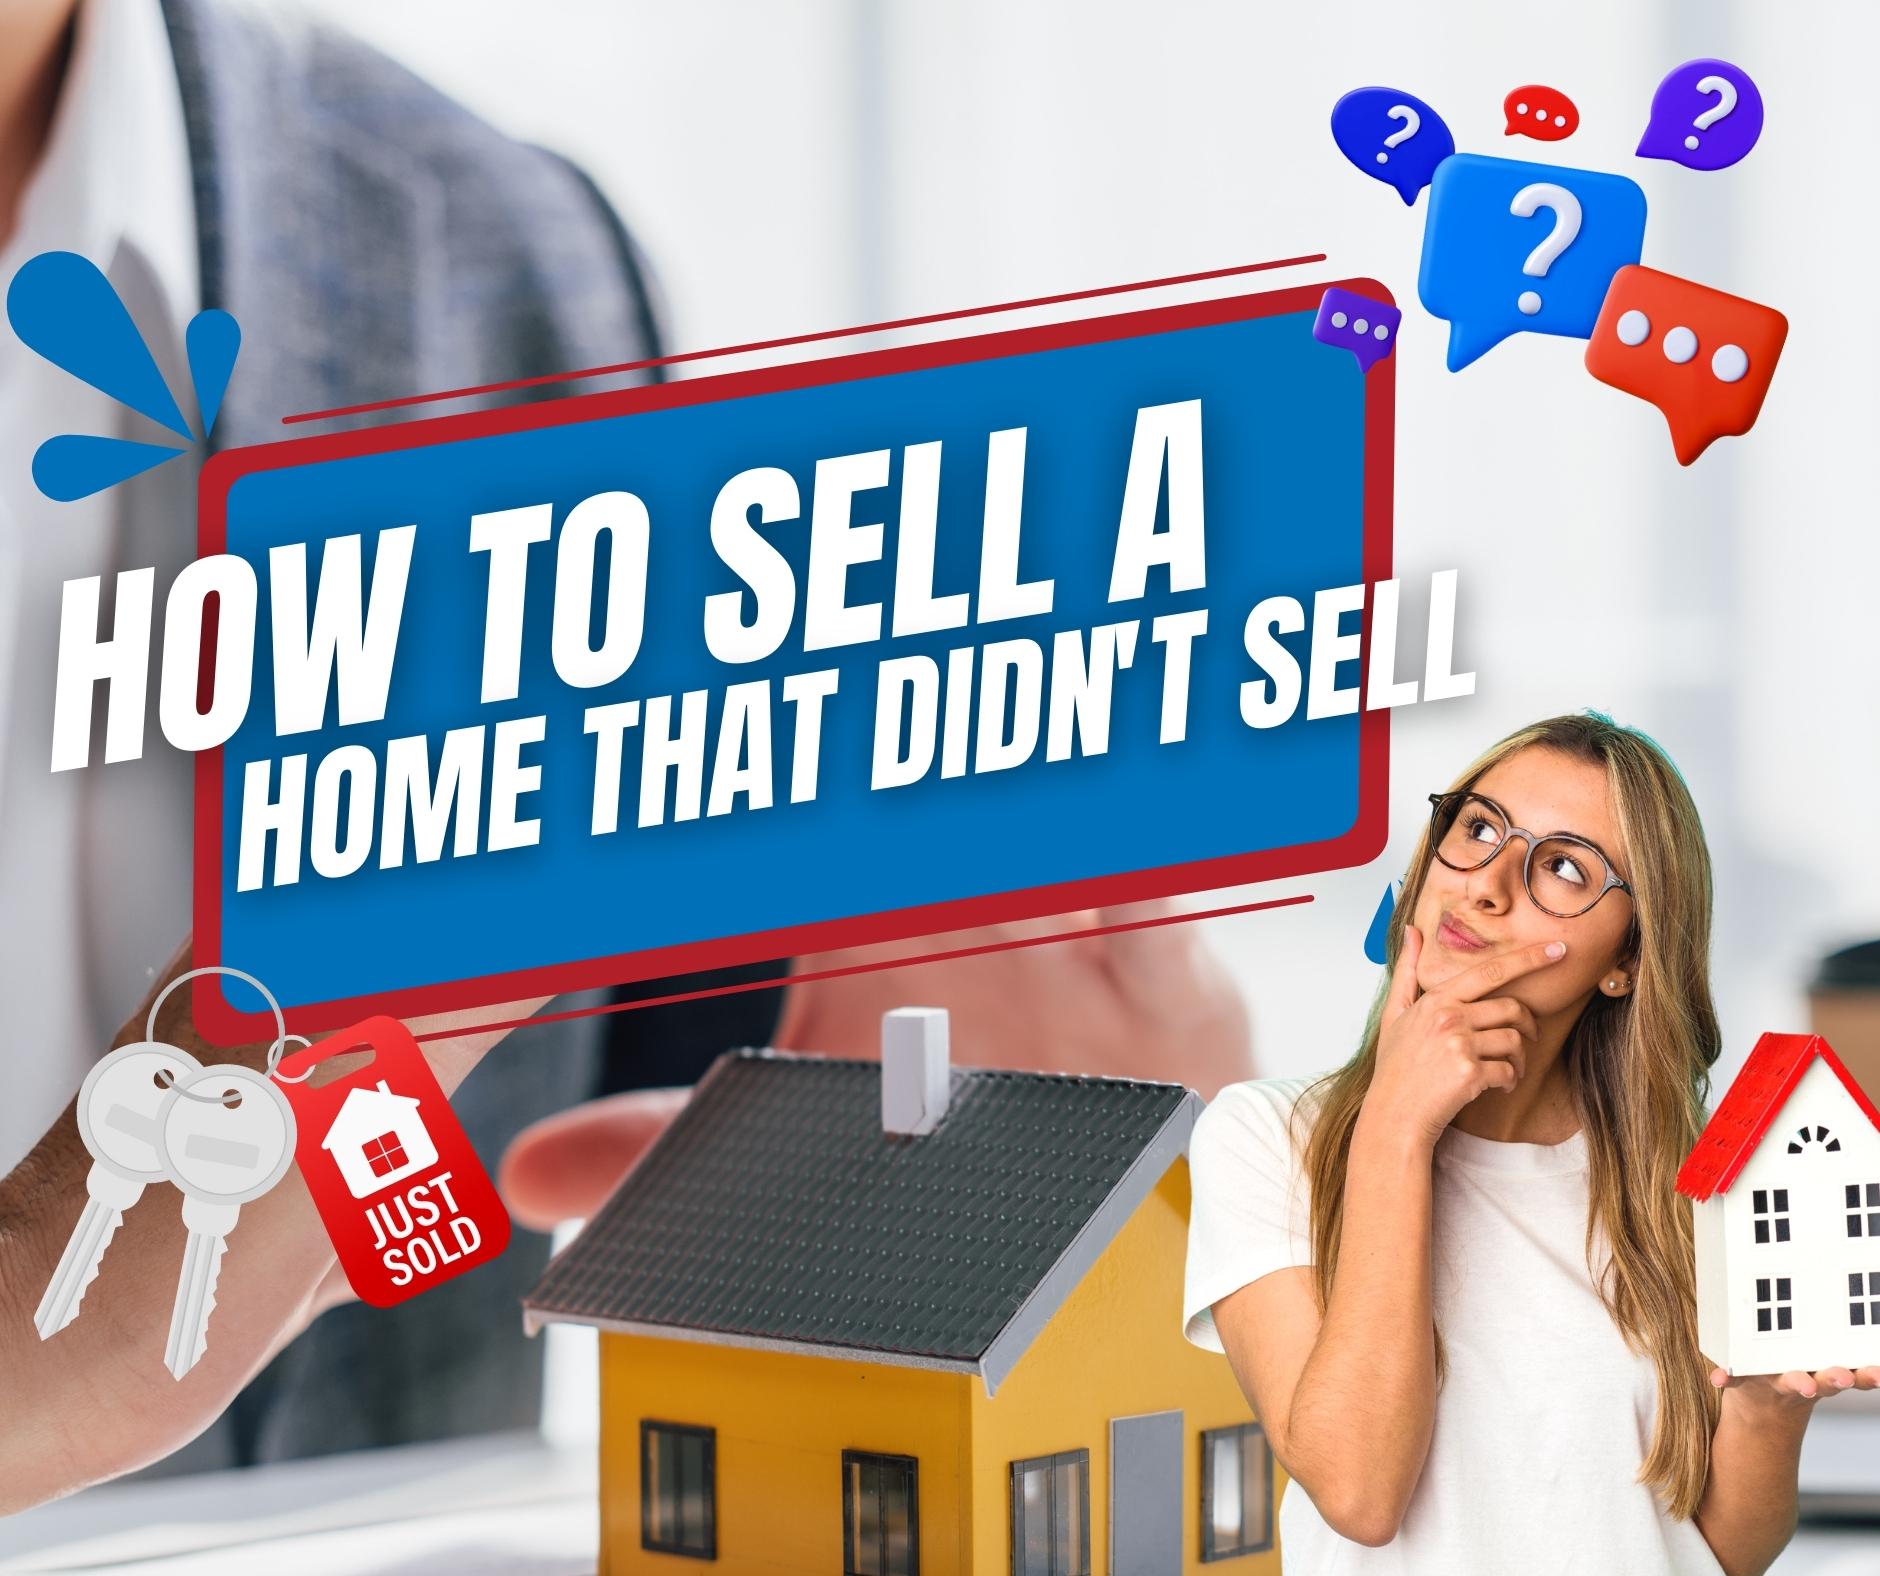 How To Sell A House That Didn't Sell